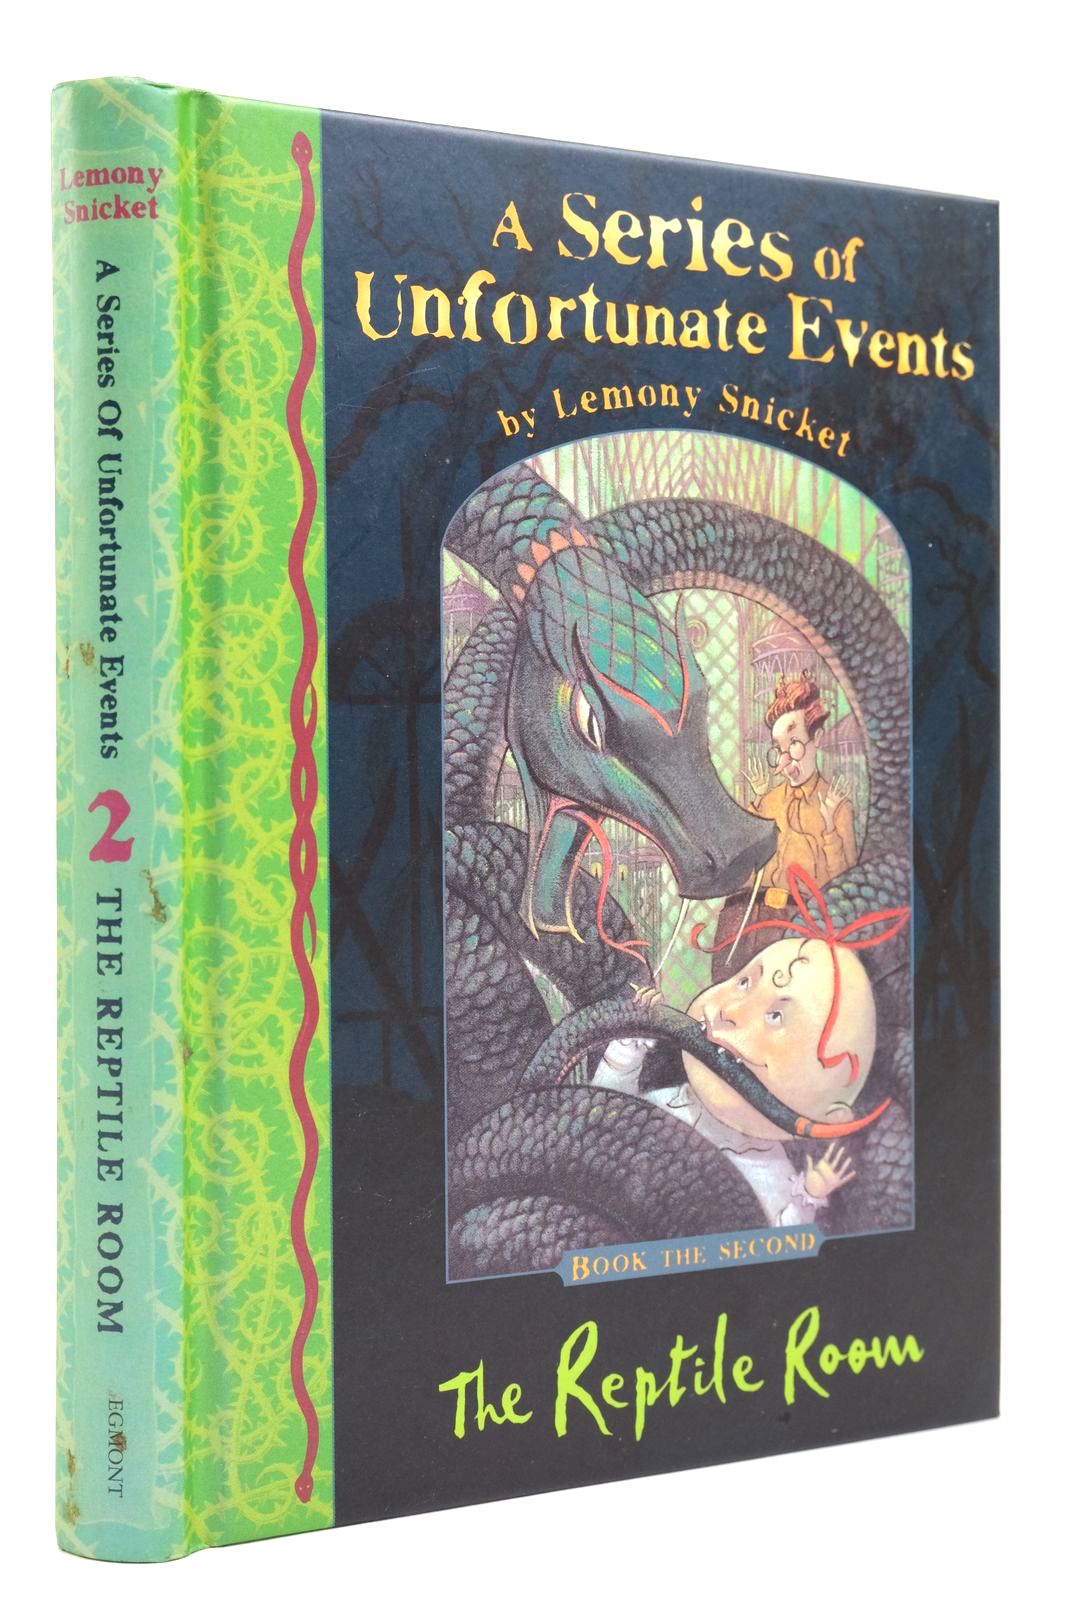 Photo of A SERIES OF UNFORTUNATE EVENTS: THE REPTILE ROOM written by Snicket, Lemony illustrated by Helquist, Brett published by Egmont Books Ltd. (STOCK CODE: 2139420)  for sale by Stella & Rose's Books